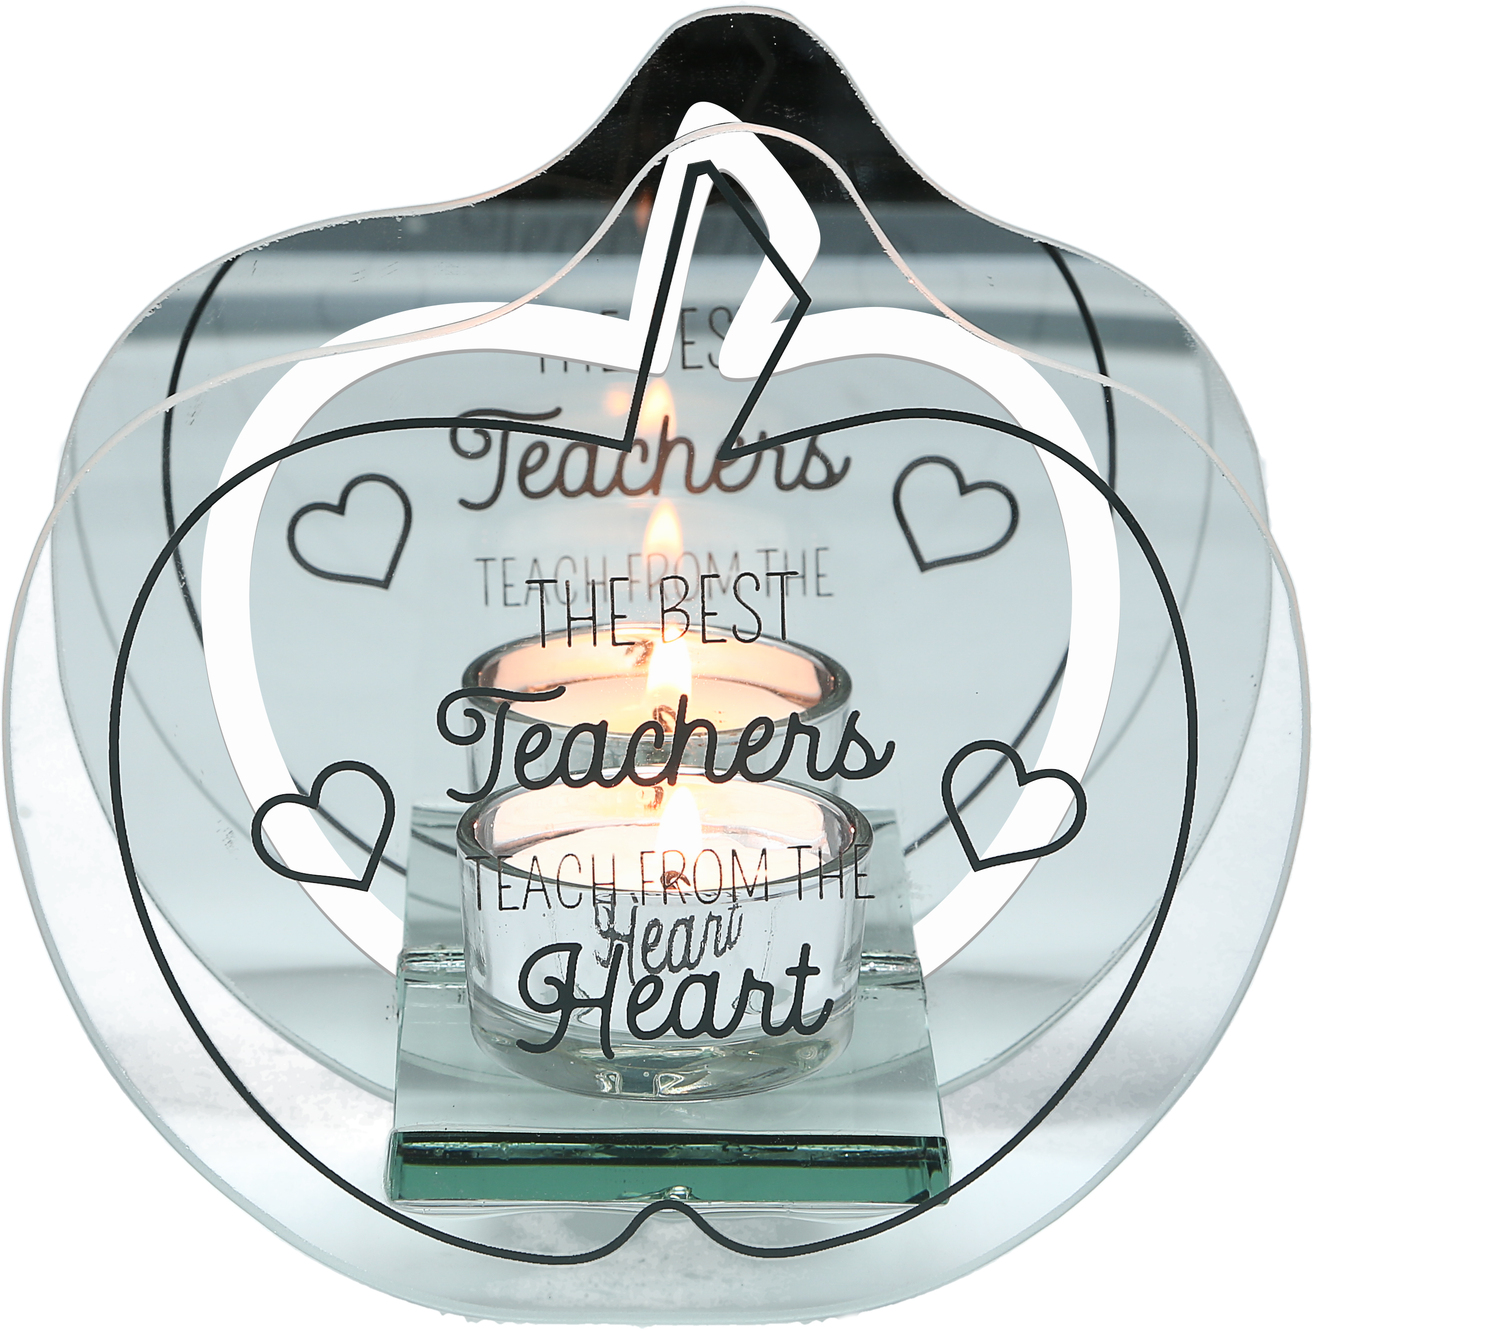  From The Heart by Teachable Moments -  From The Heart - 5.5" x 5.25" Mirrored Glass Candle Holder